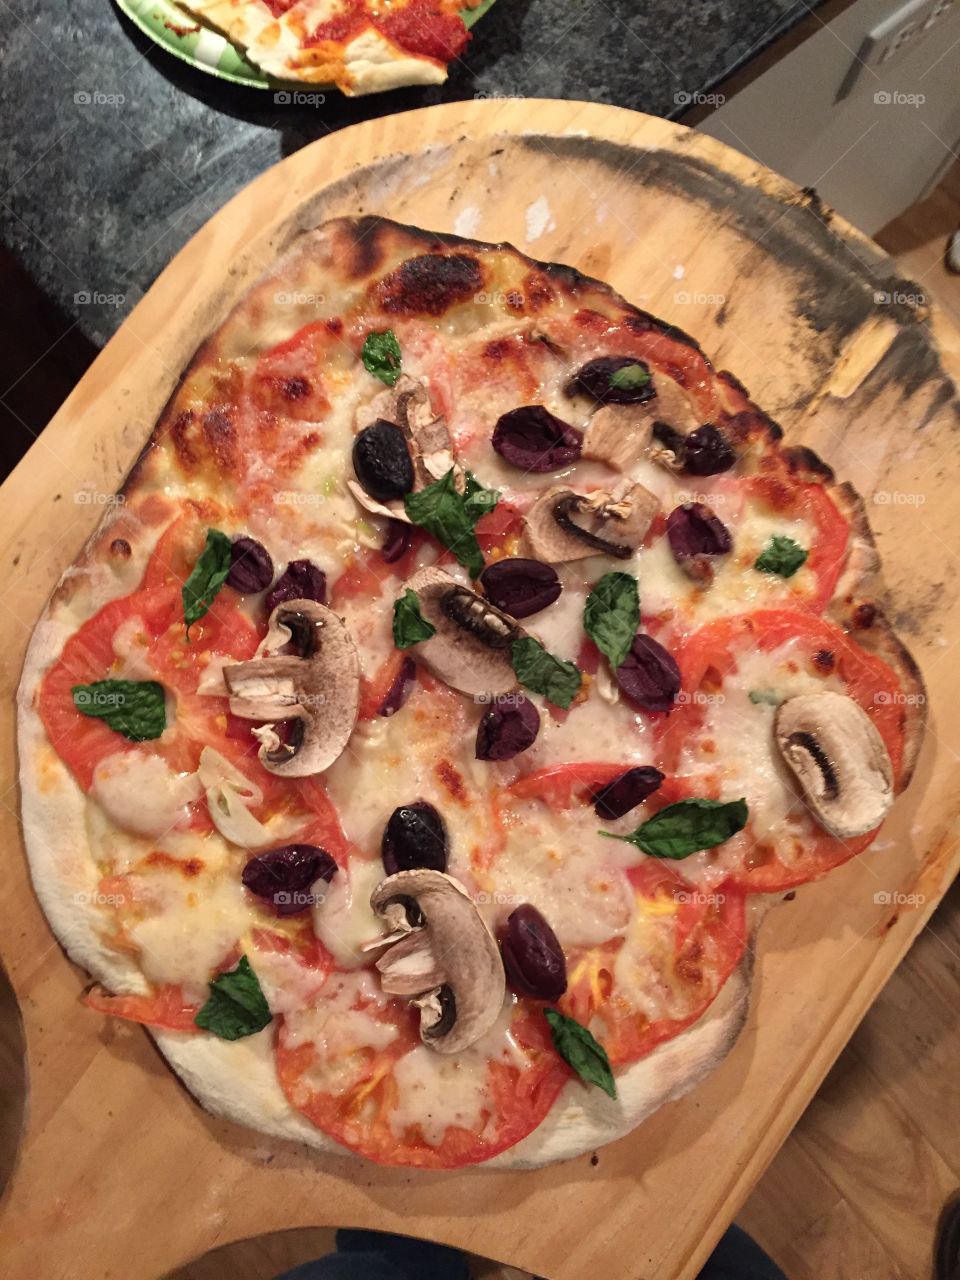 Homemade pizza oven pizza 